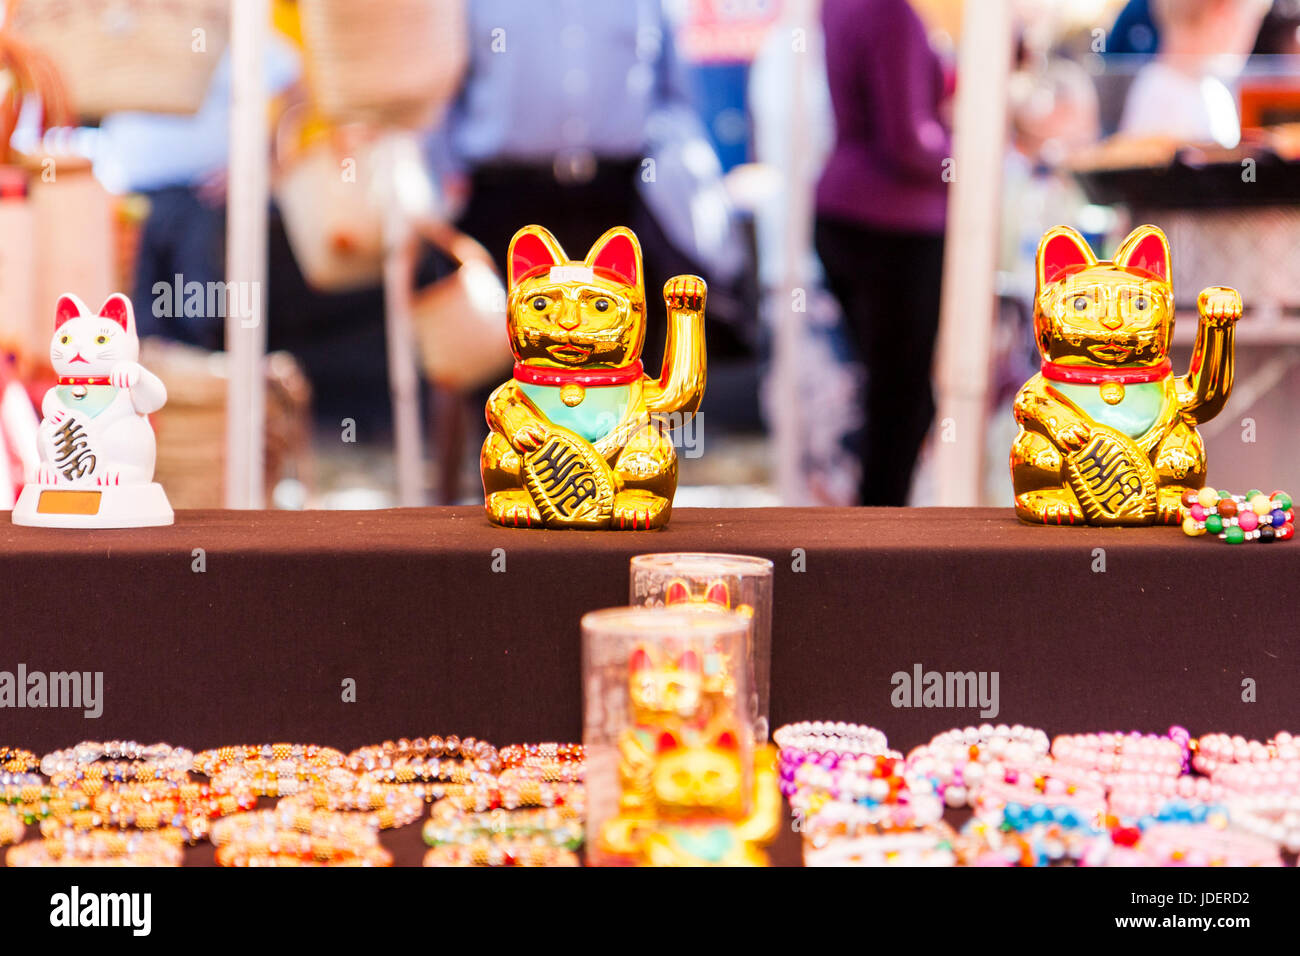 Japanese lucky cat, Maneki-neko, figures on stall. Traditional kneeling cat figure with one arm raised in greeting to welcome customers. Stock Photo